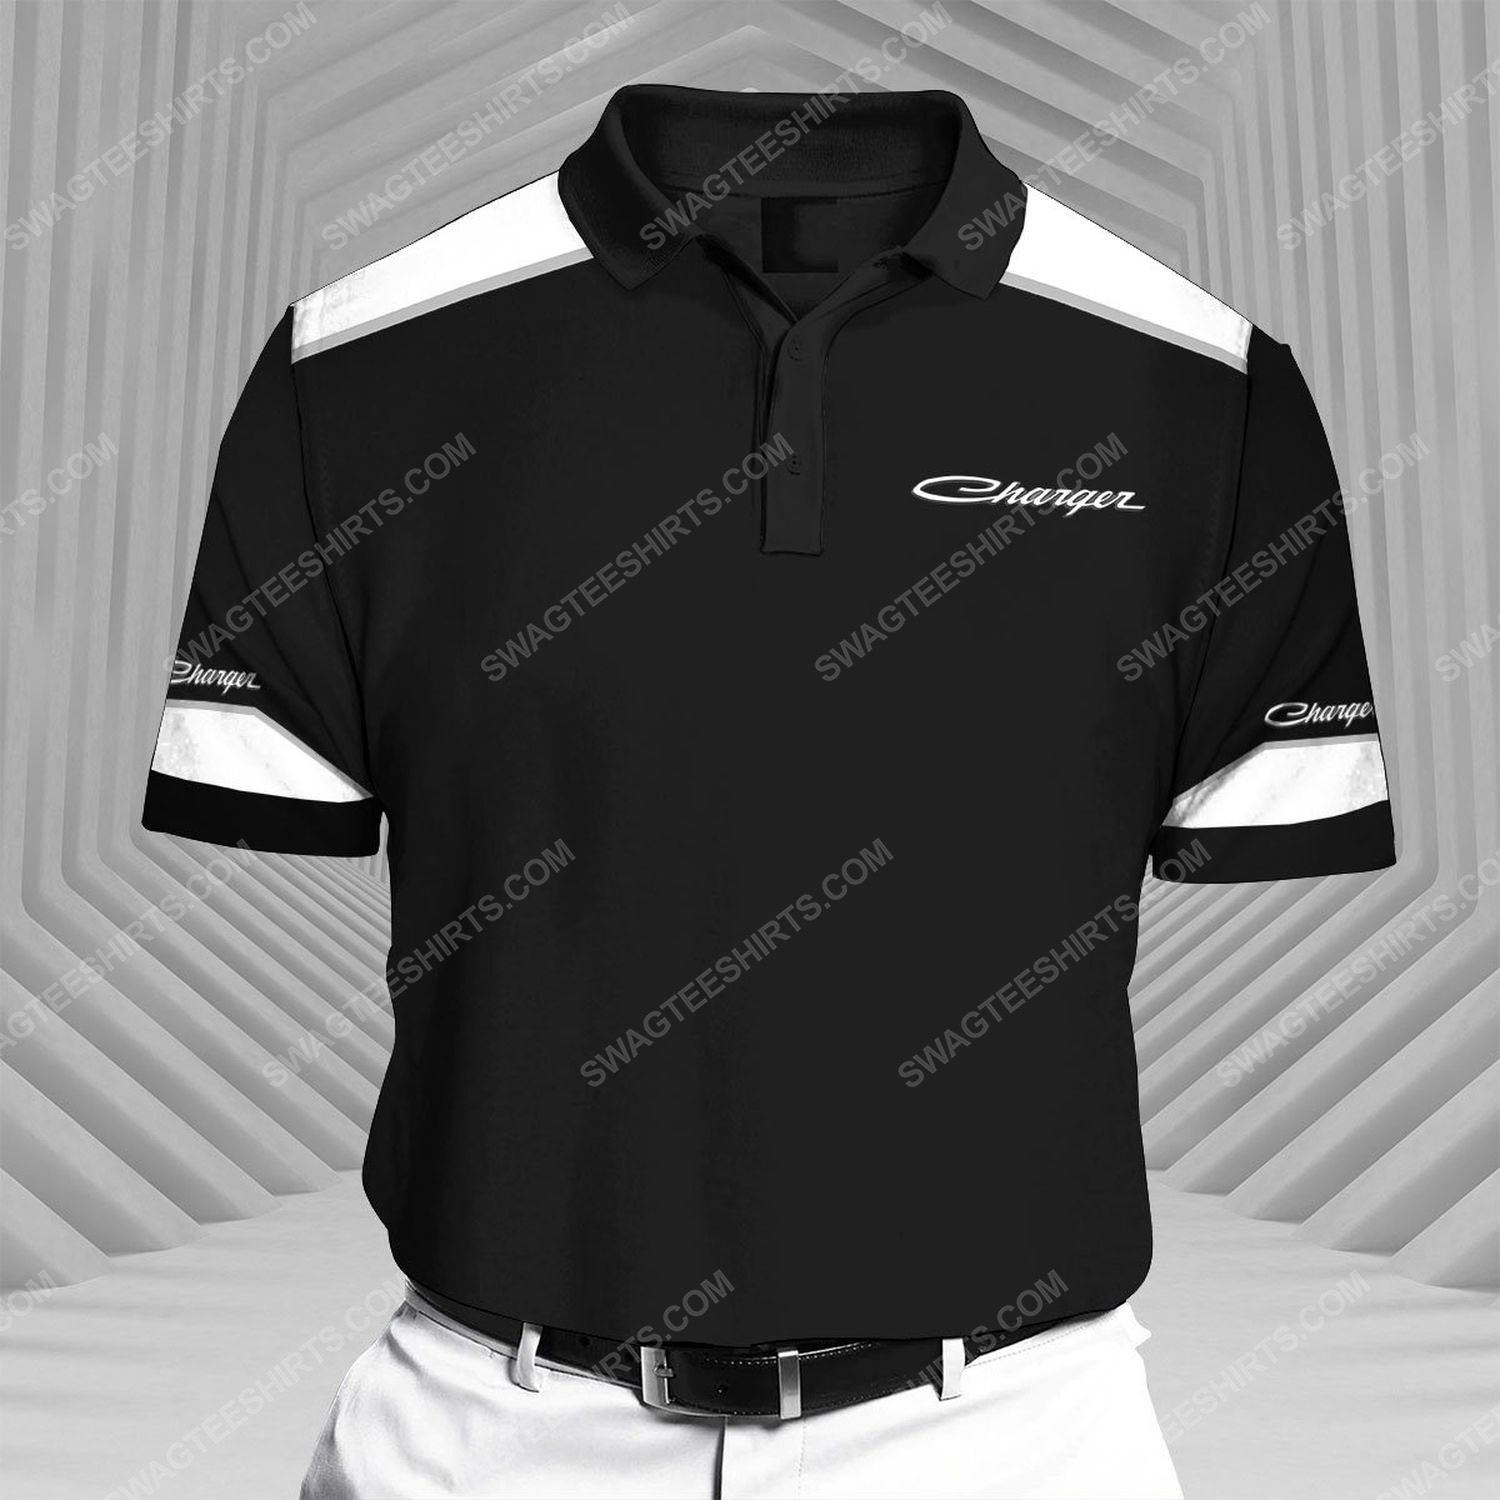 Dodge charger sports car all over print polo shirt 1 - Copy (2)